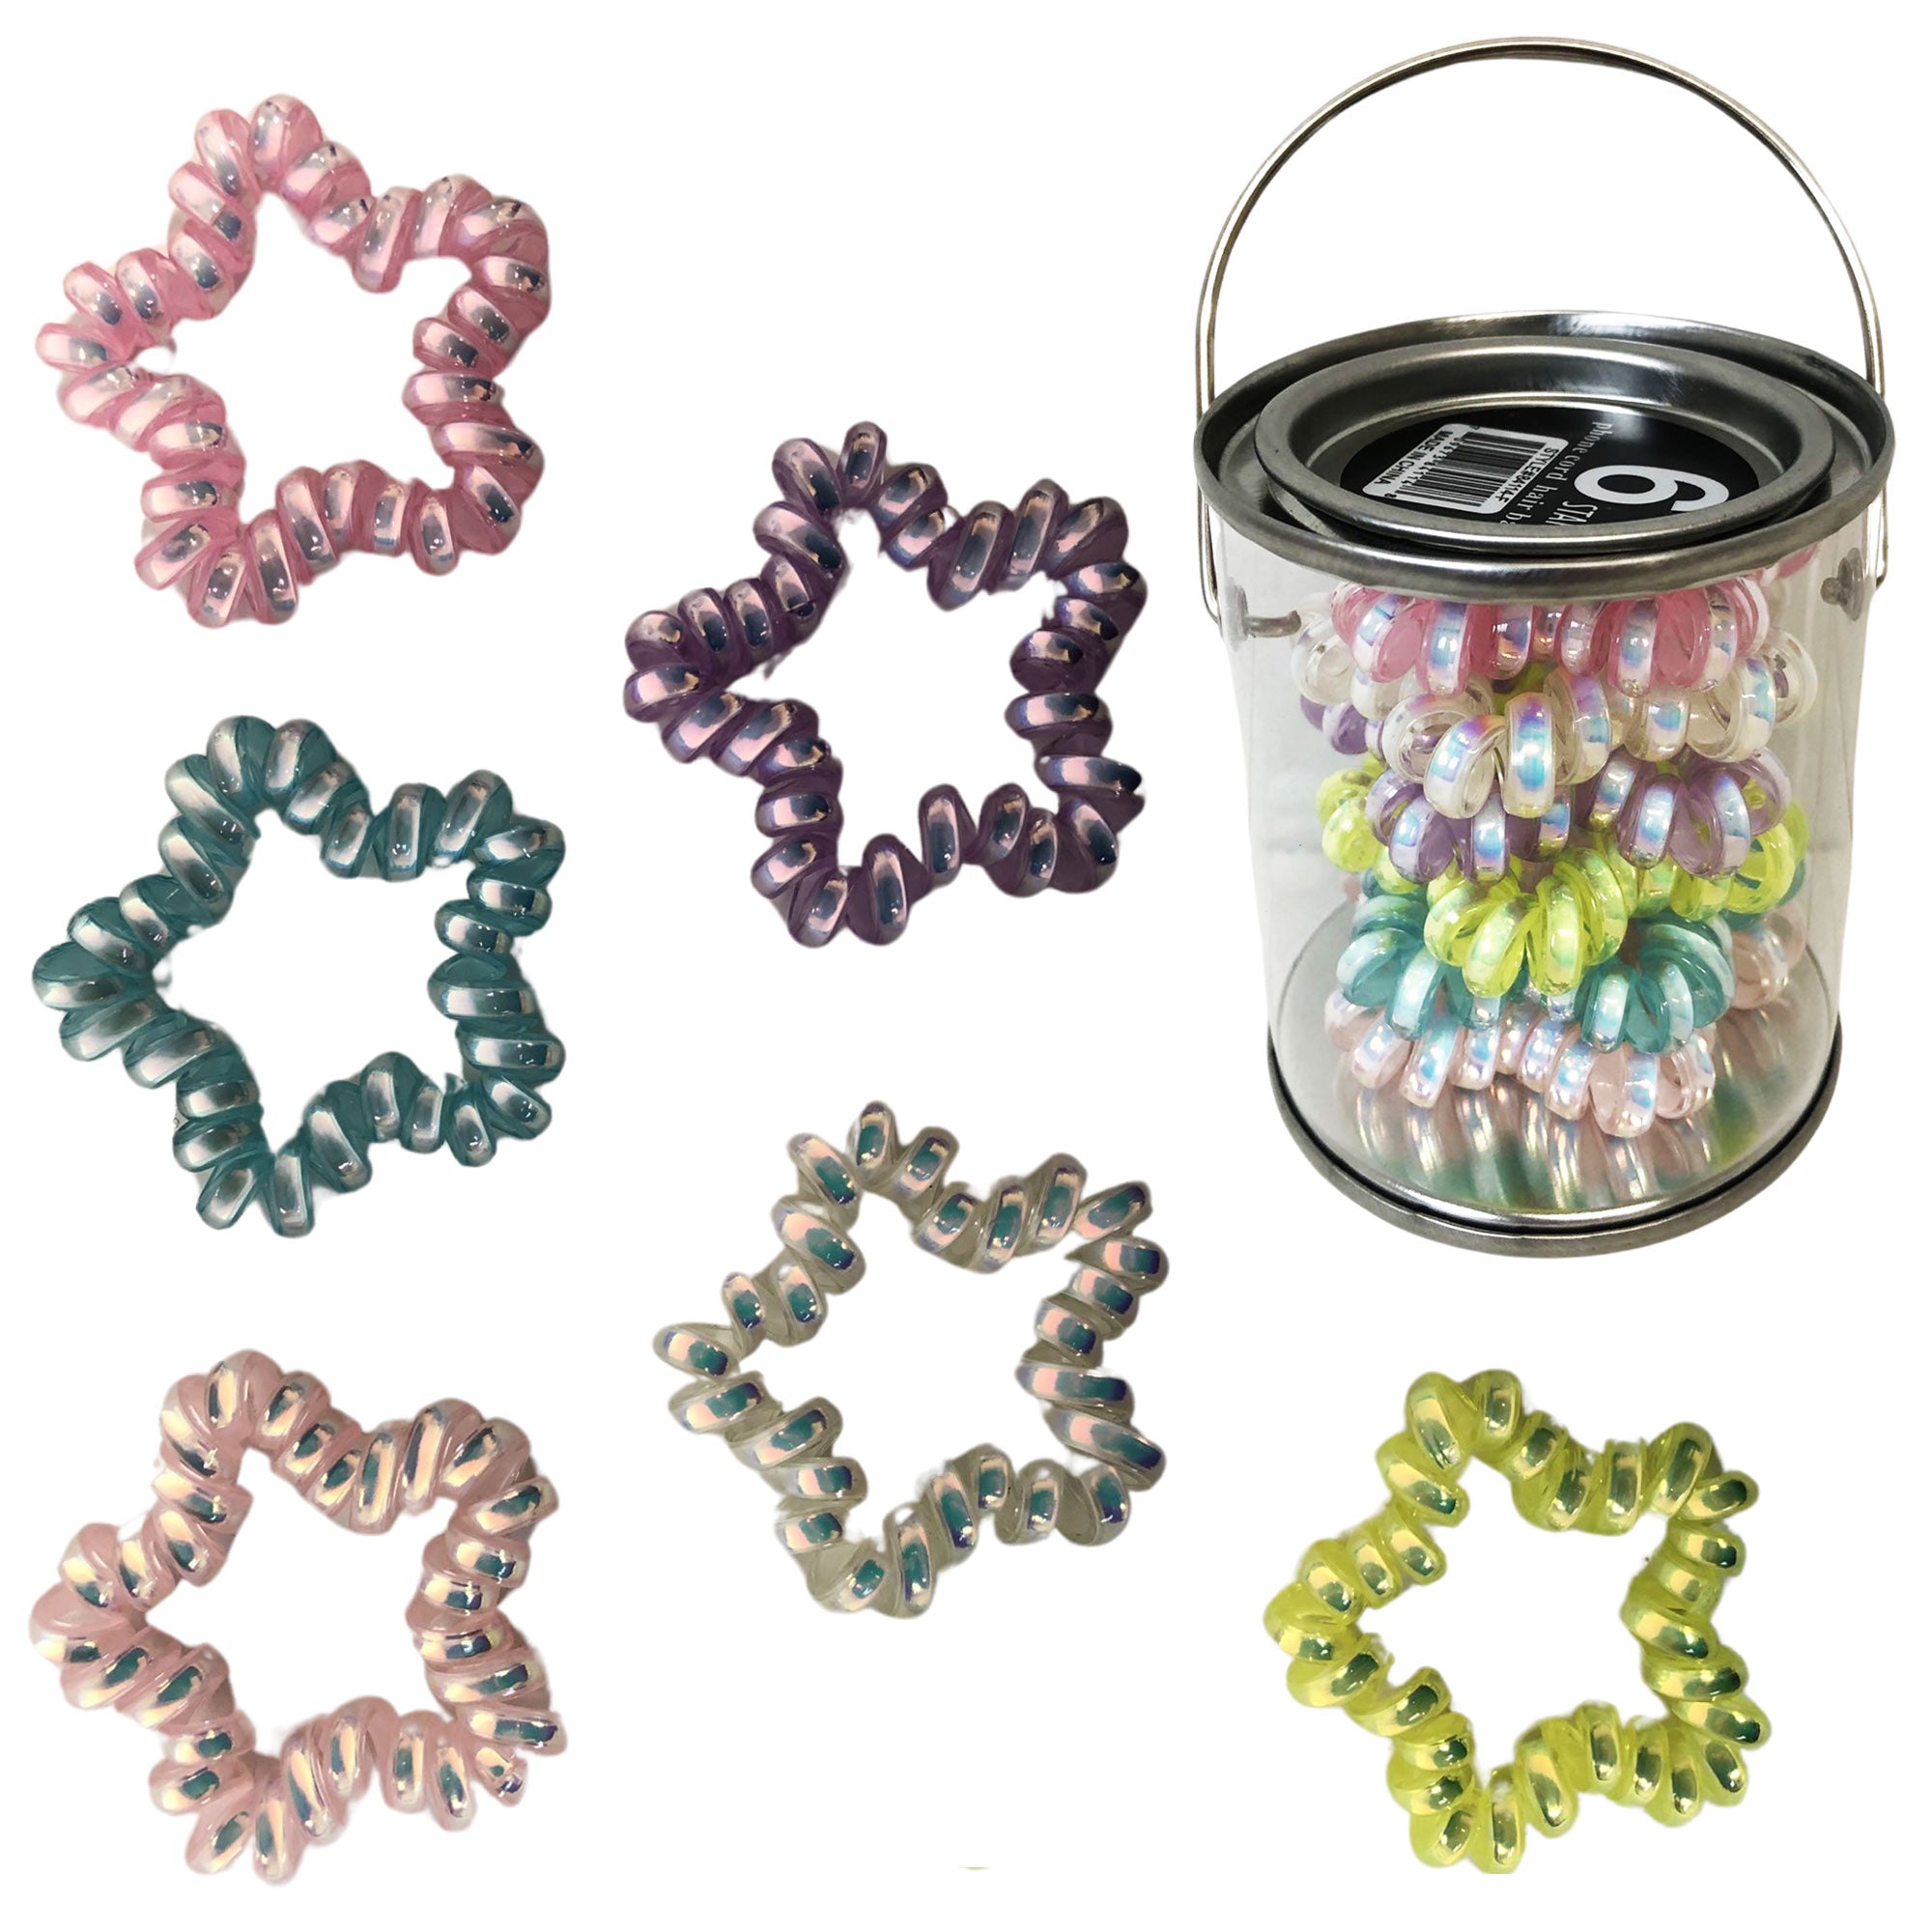 CLEARANCE CORDED HAIR TIES - 6 IN A CAN (CASE OF 36 - $2.00 / PIECE)  Wholesale Hair Ties Star Shaped SKU: 84114-36